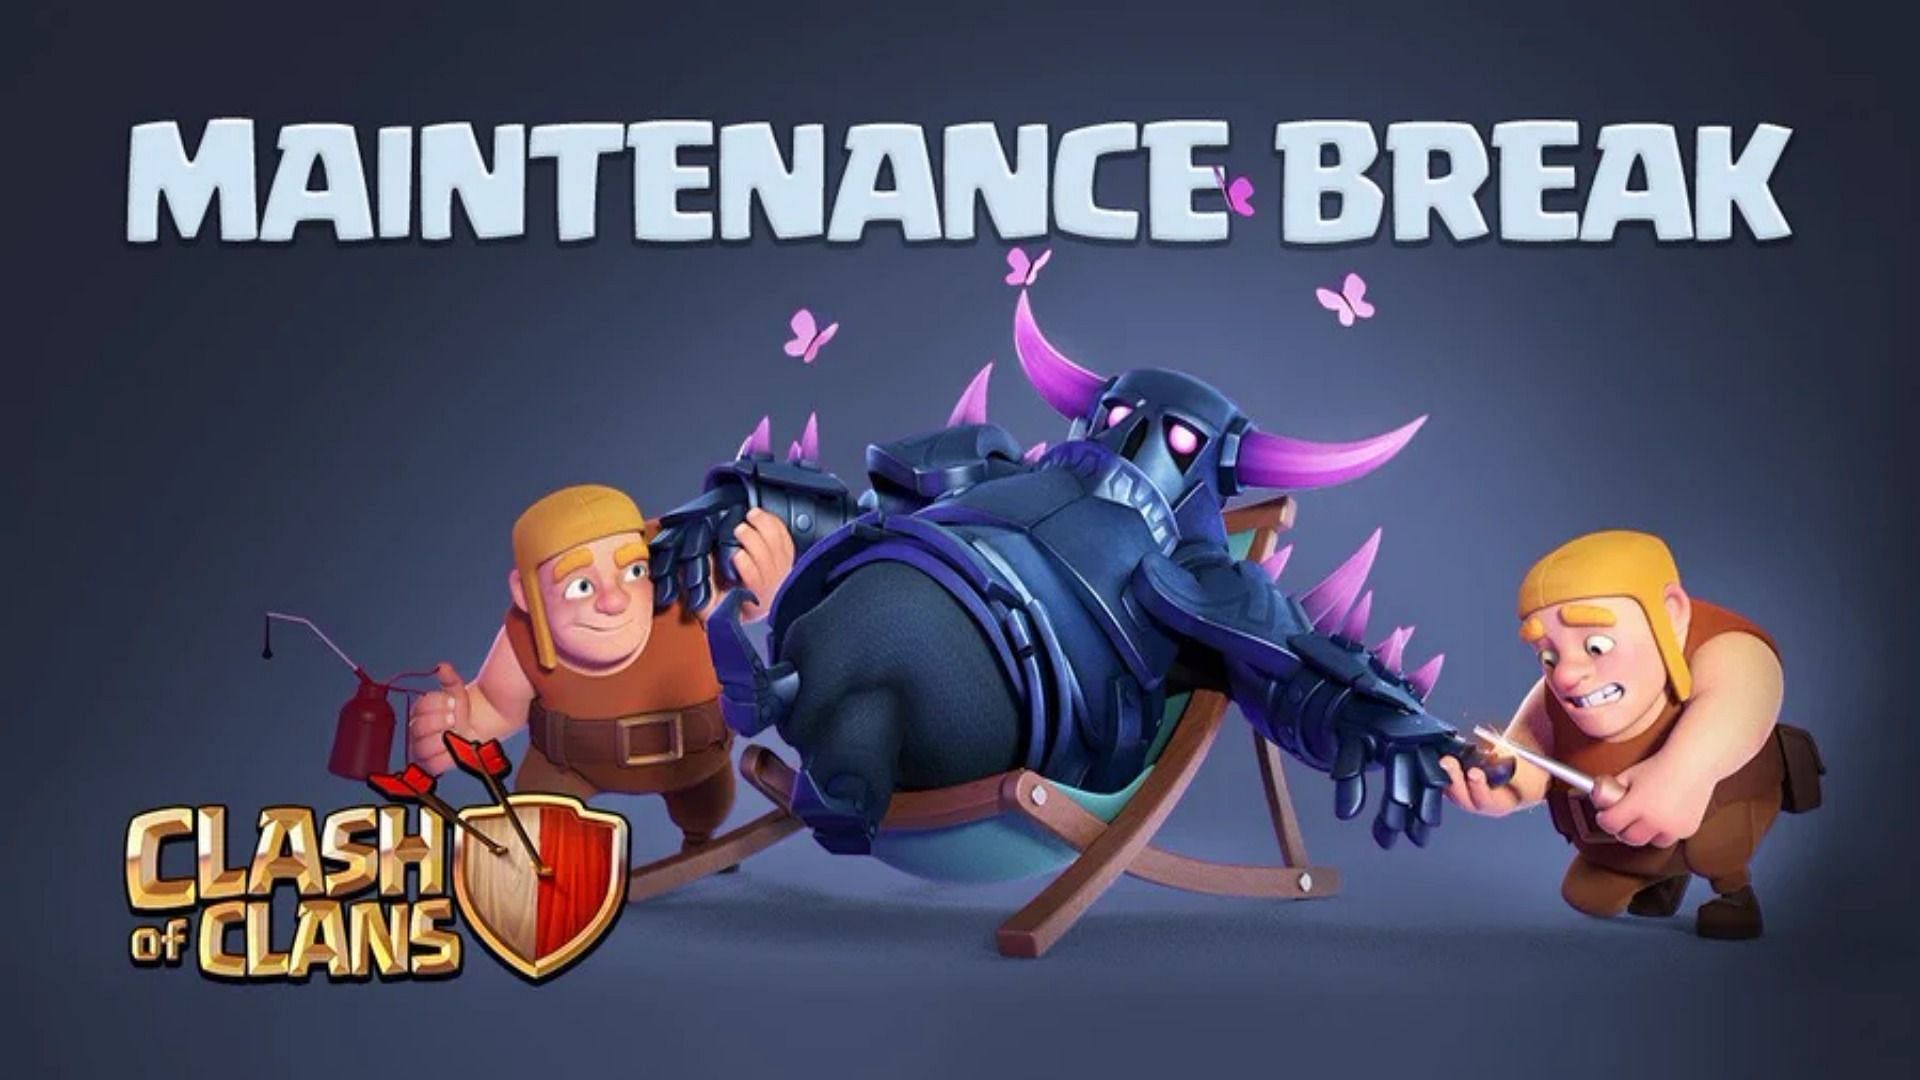 A new maintenance has been announced for Clash of Clans